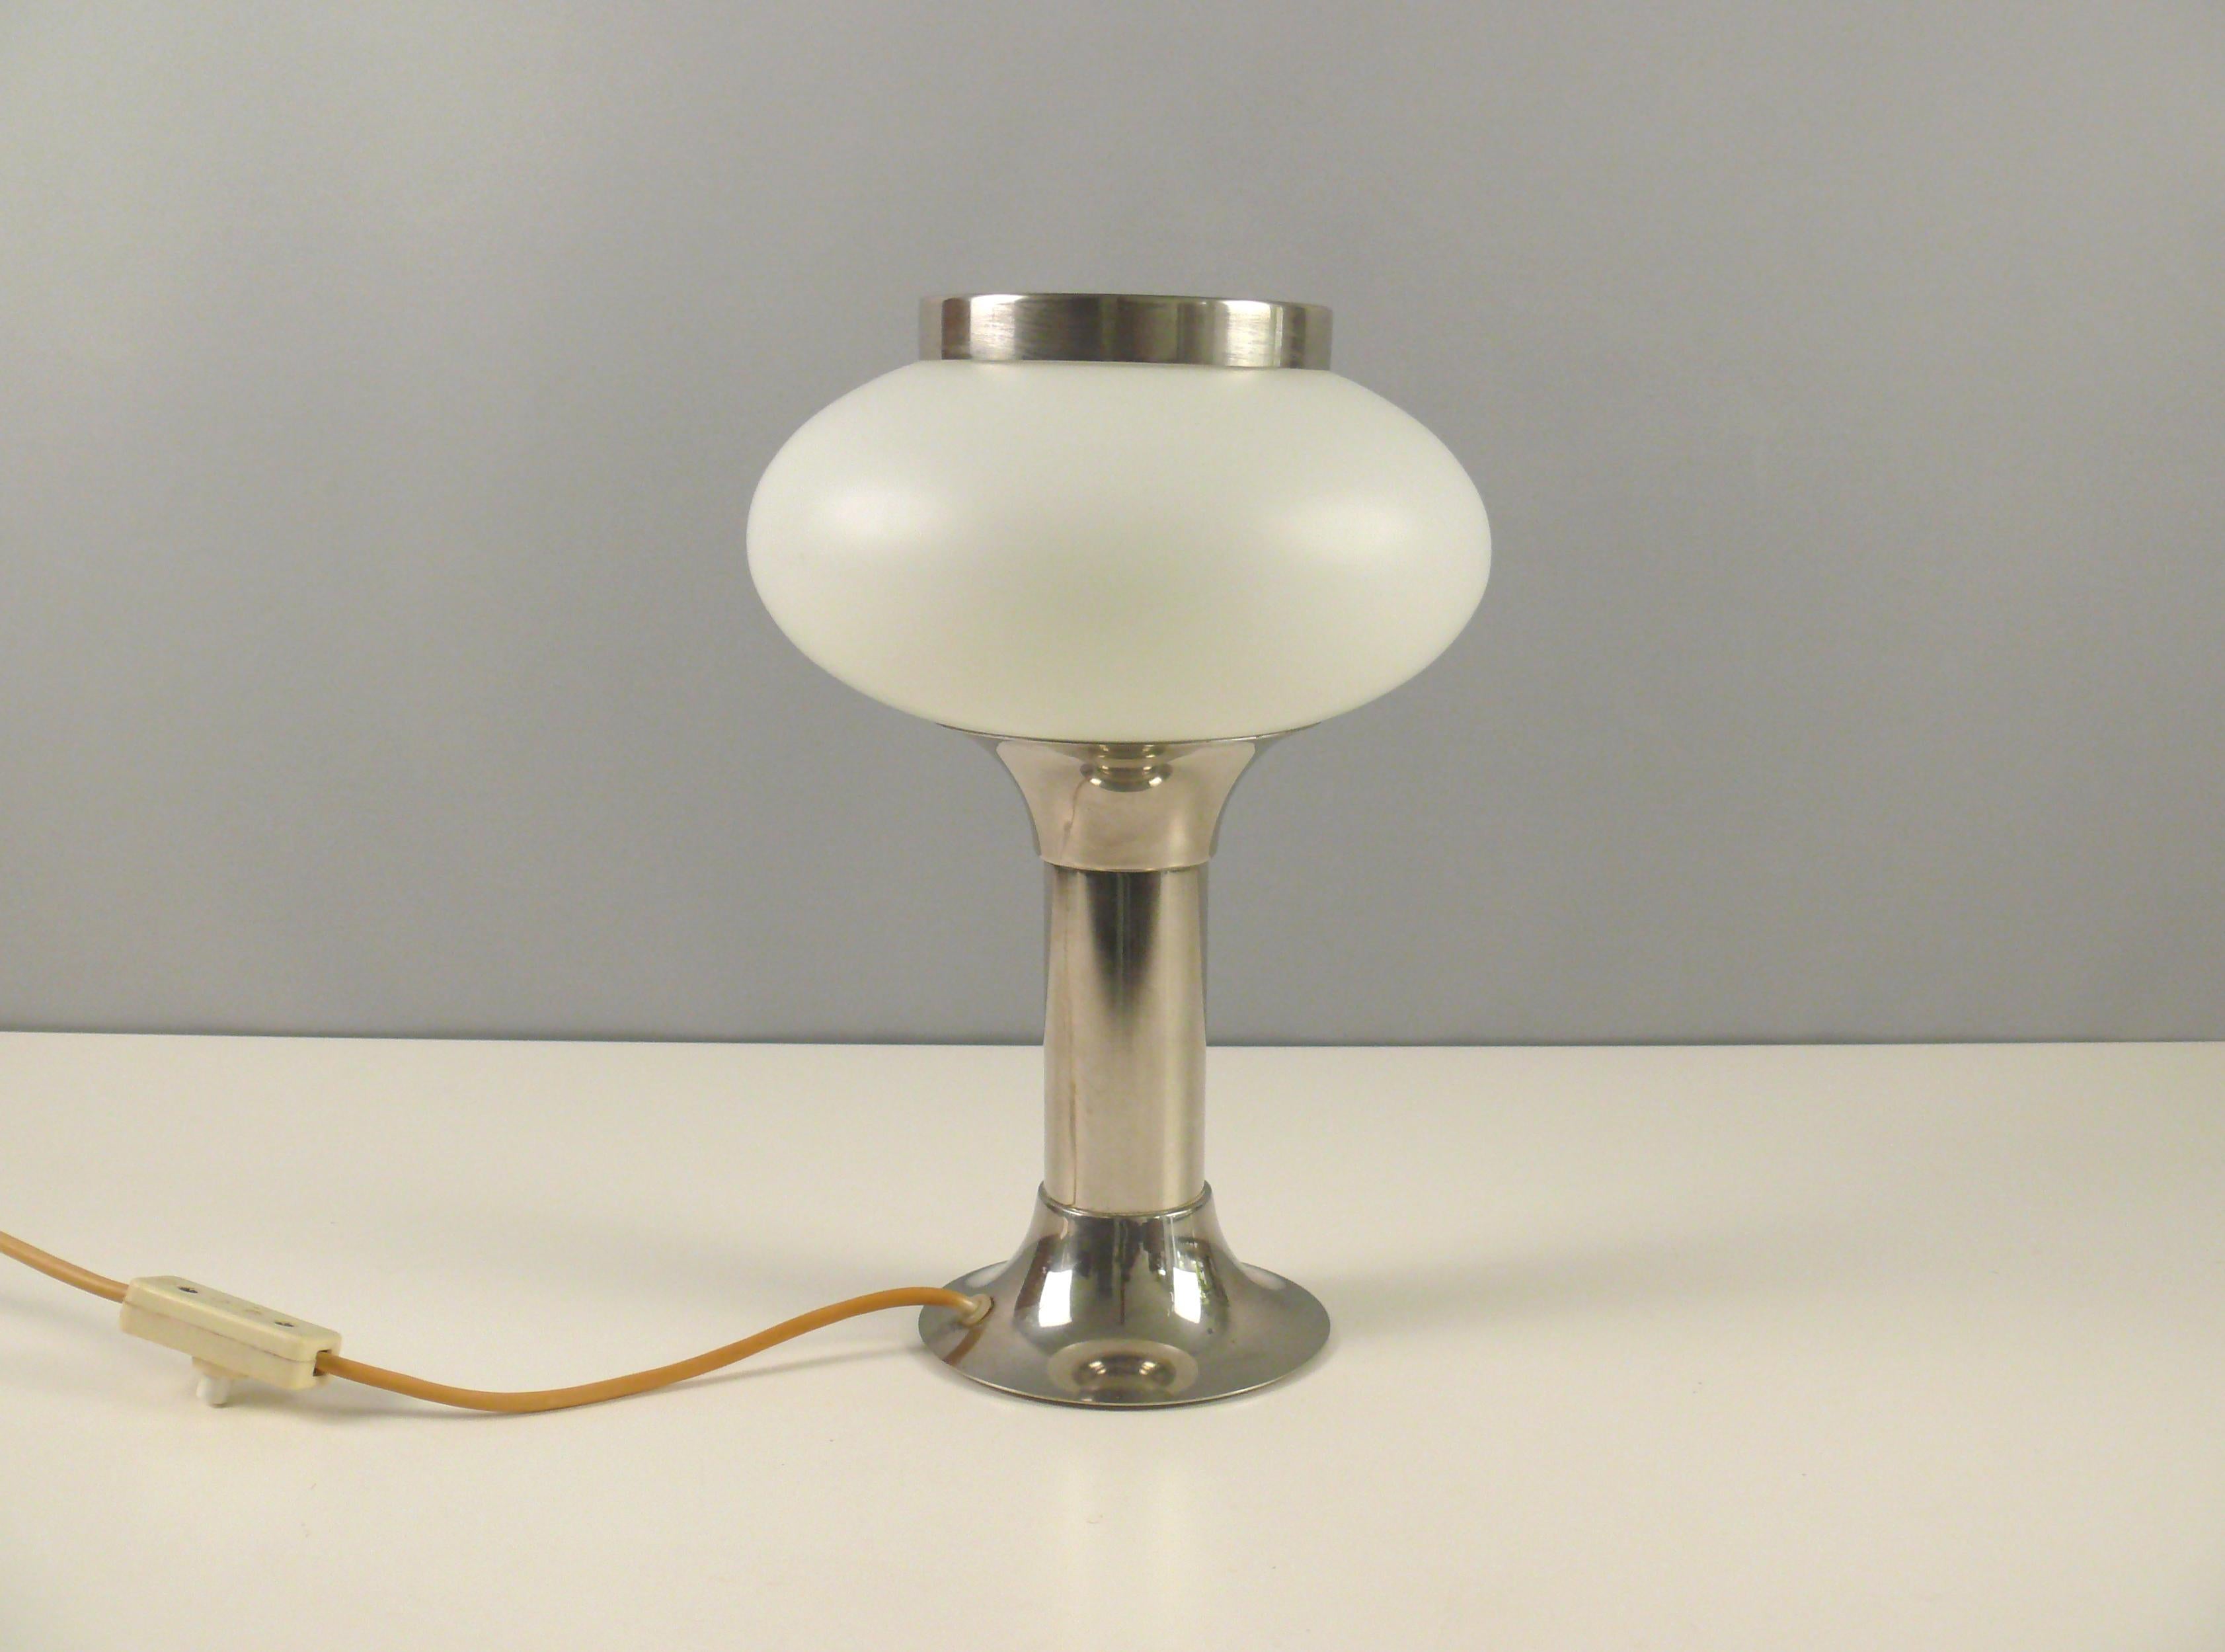 Rare and elegant table lamp made of opal glass with a chrome-plated metal base by VEB Narva Leuchtenbau Lengenfeld, GDR - design Classic of the Space Age era, 1970s. A special feature of this lamp is the metal ring loosely placed on top of the glass